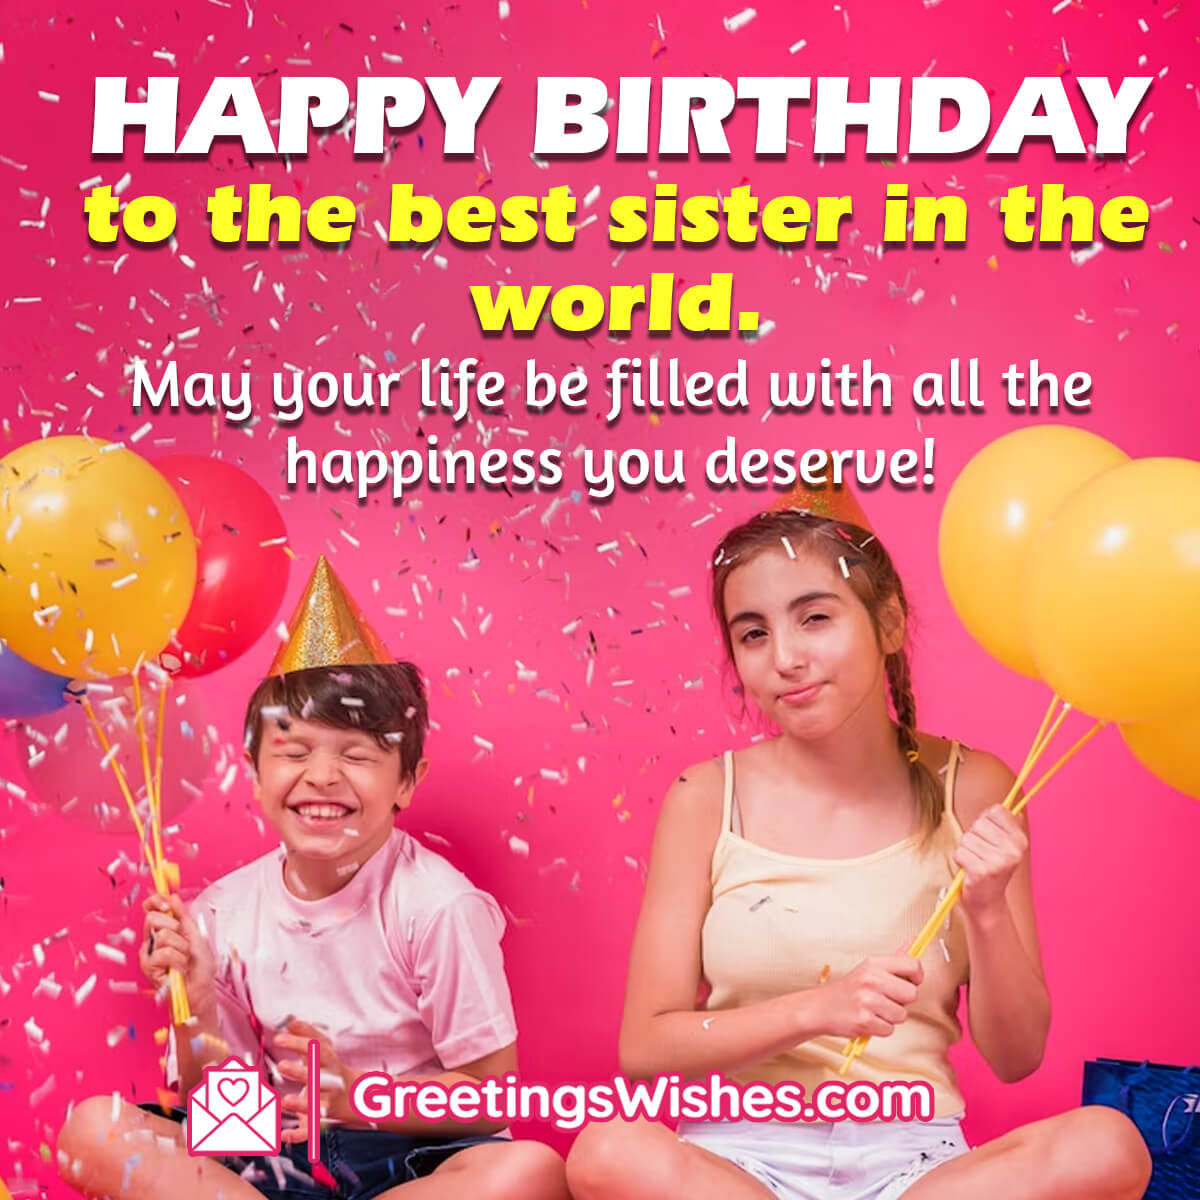 Happy Birthday Wish For Best Sister